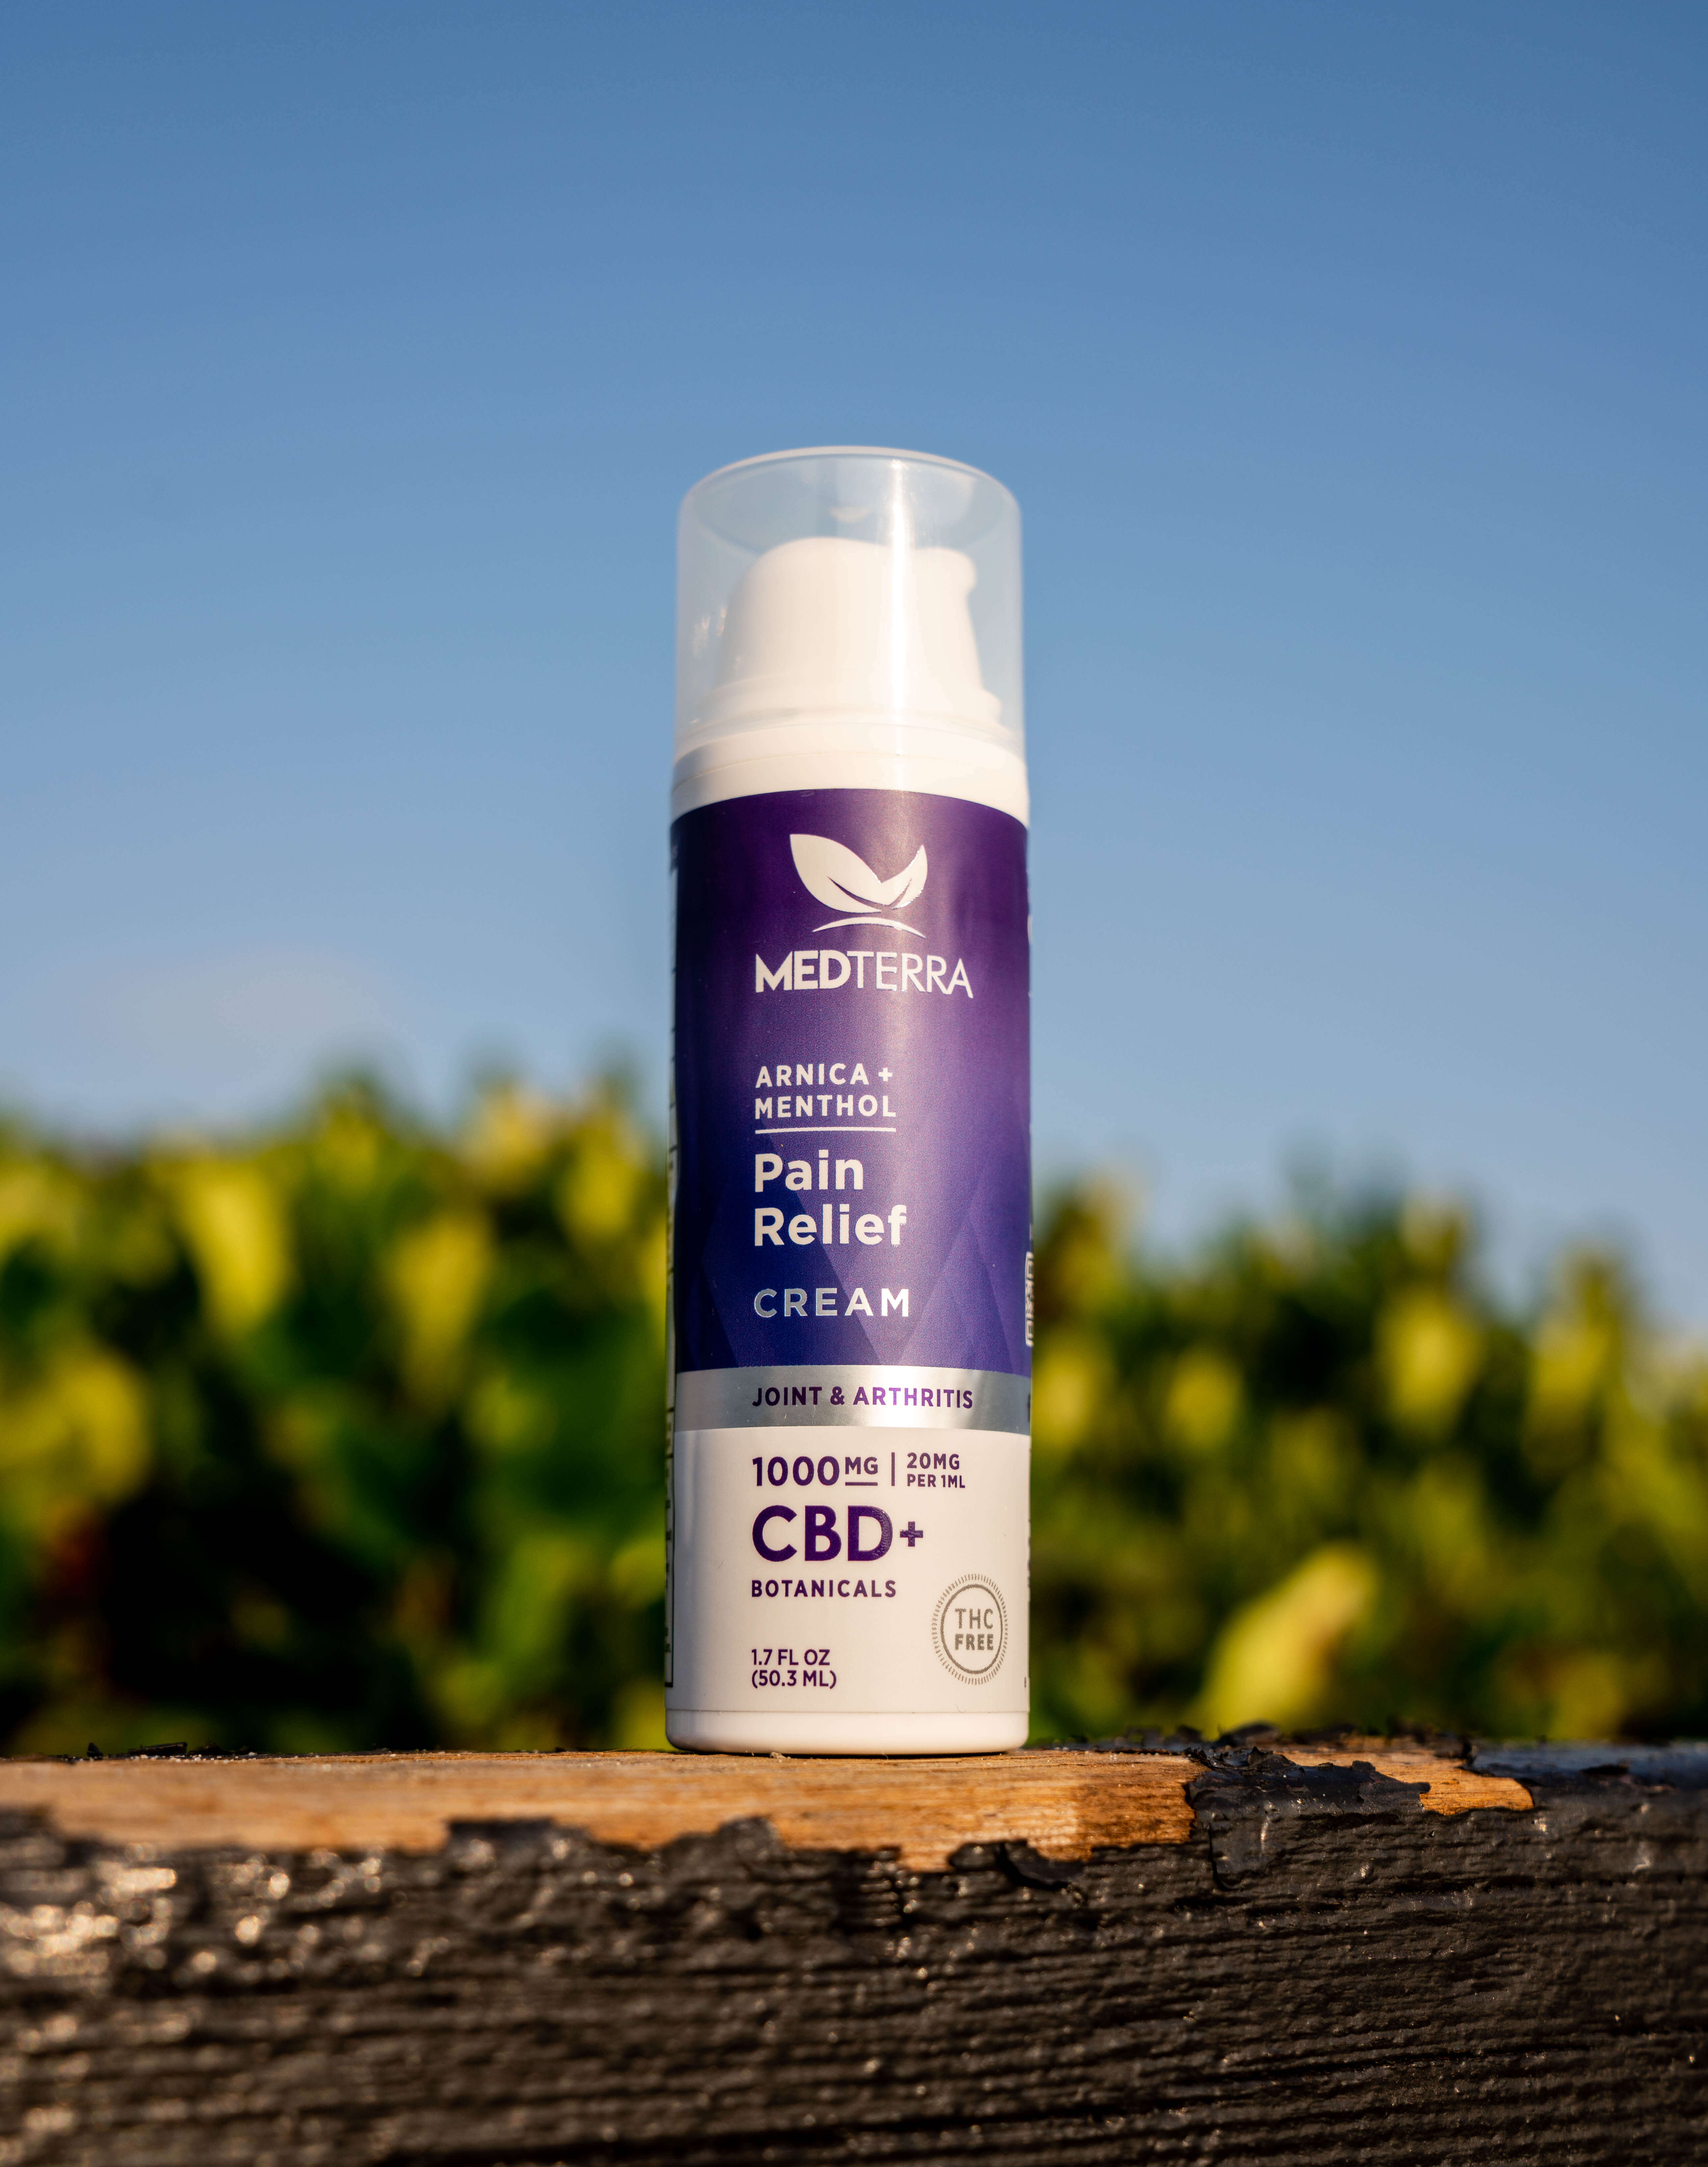 CBD Pet Oil is a convenient and precise way to administer your pet’s daily dose of CBD.